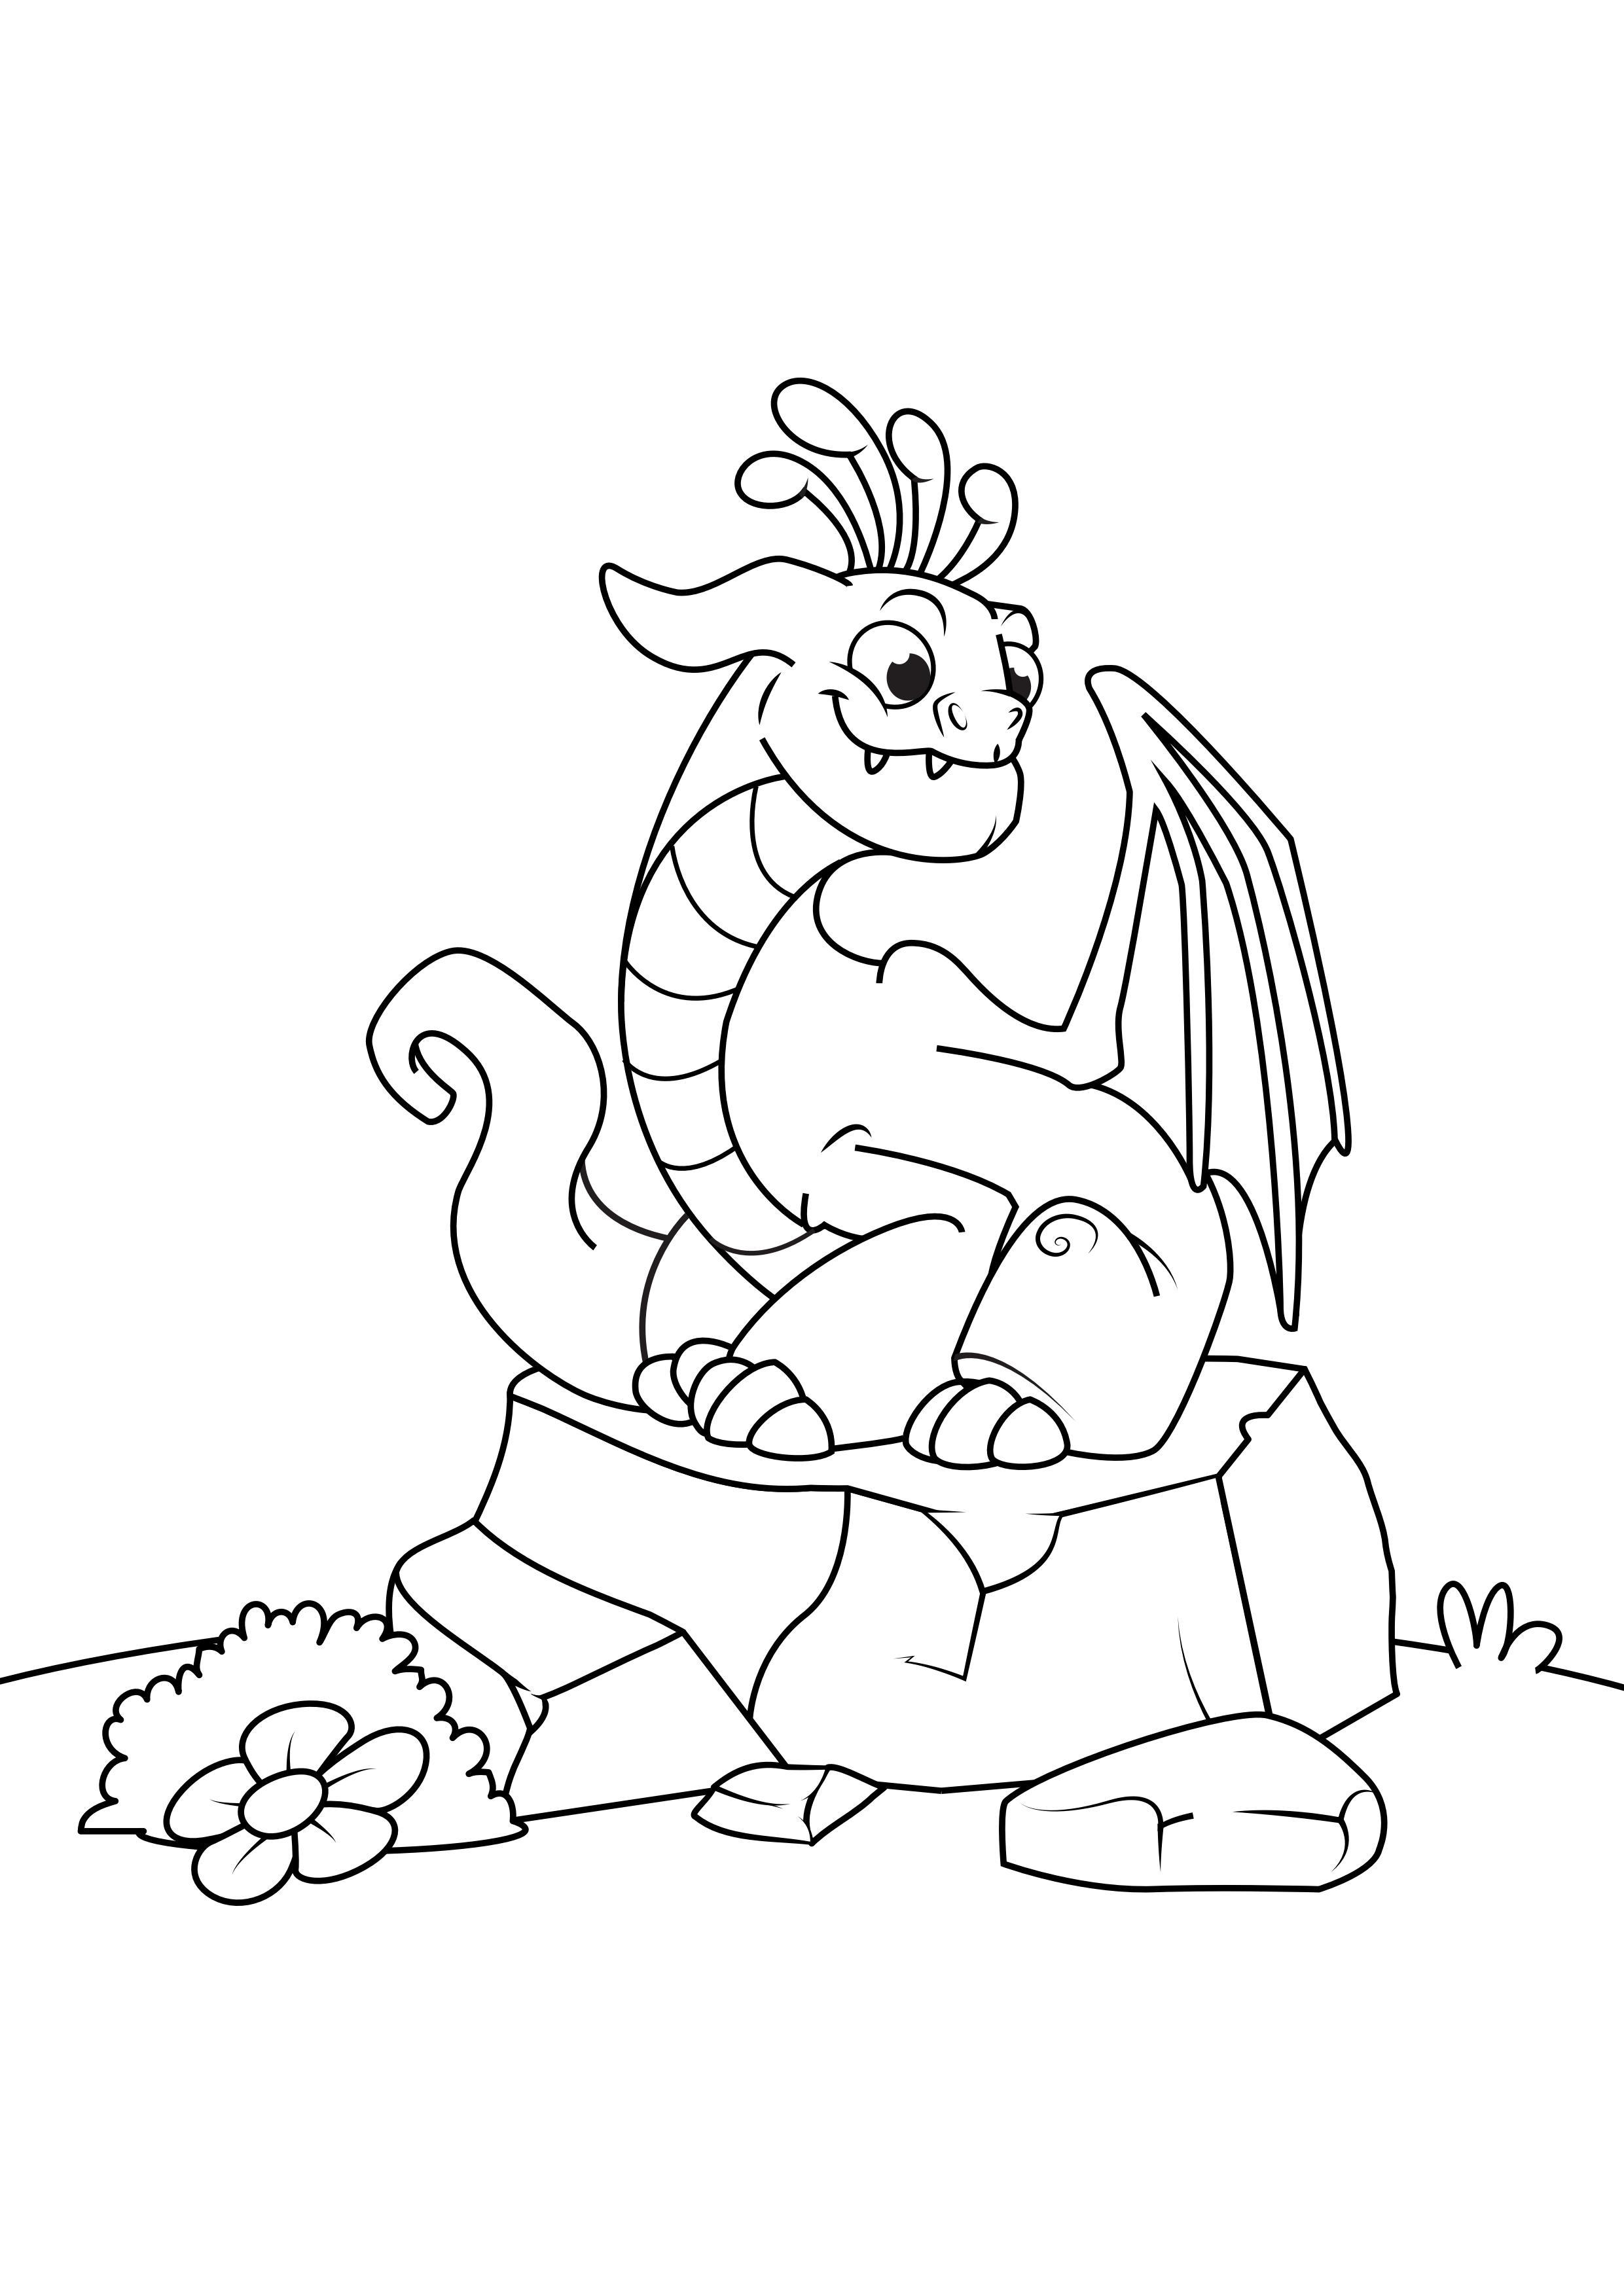 Coloring page dragon on stone